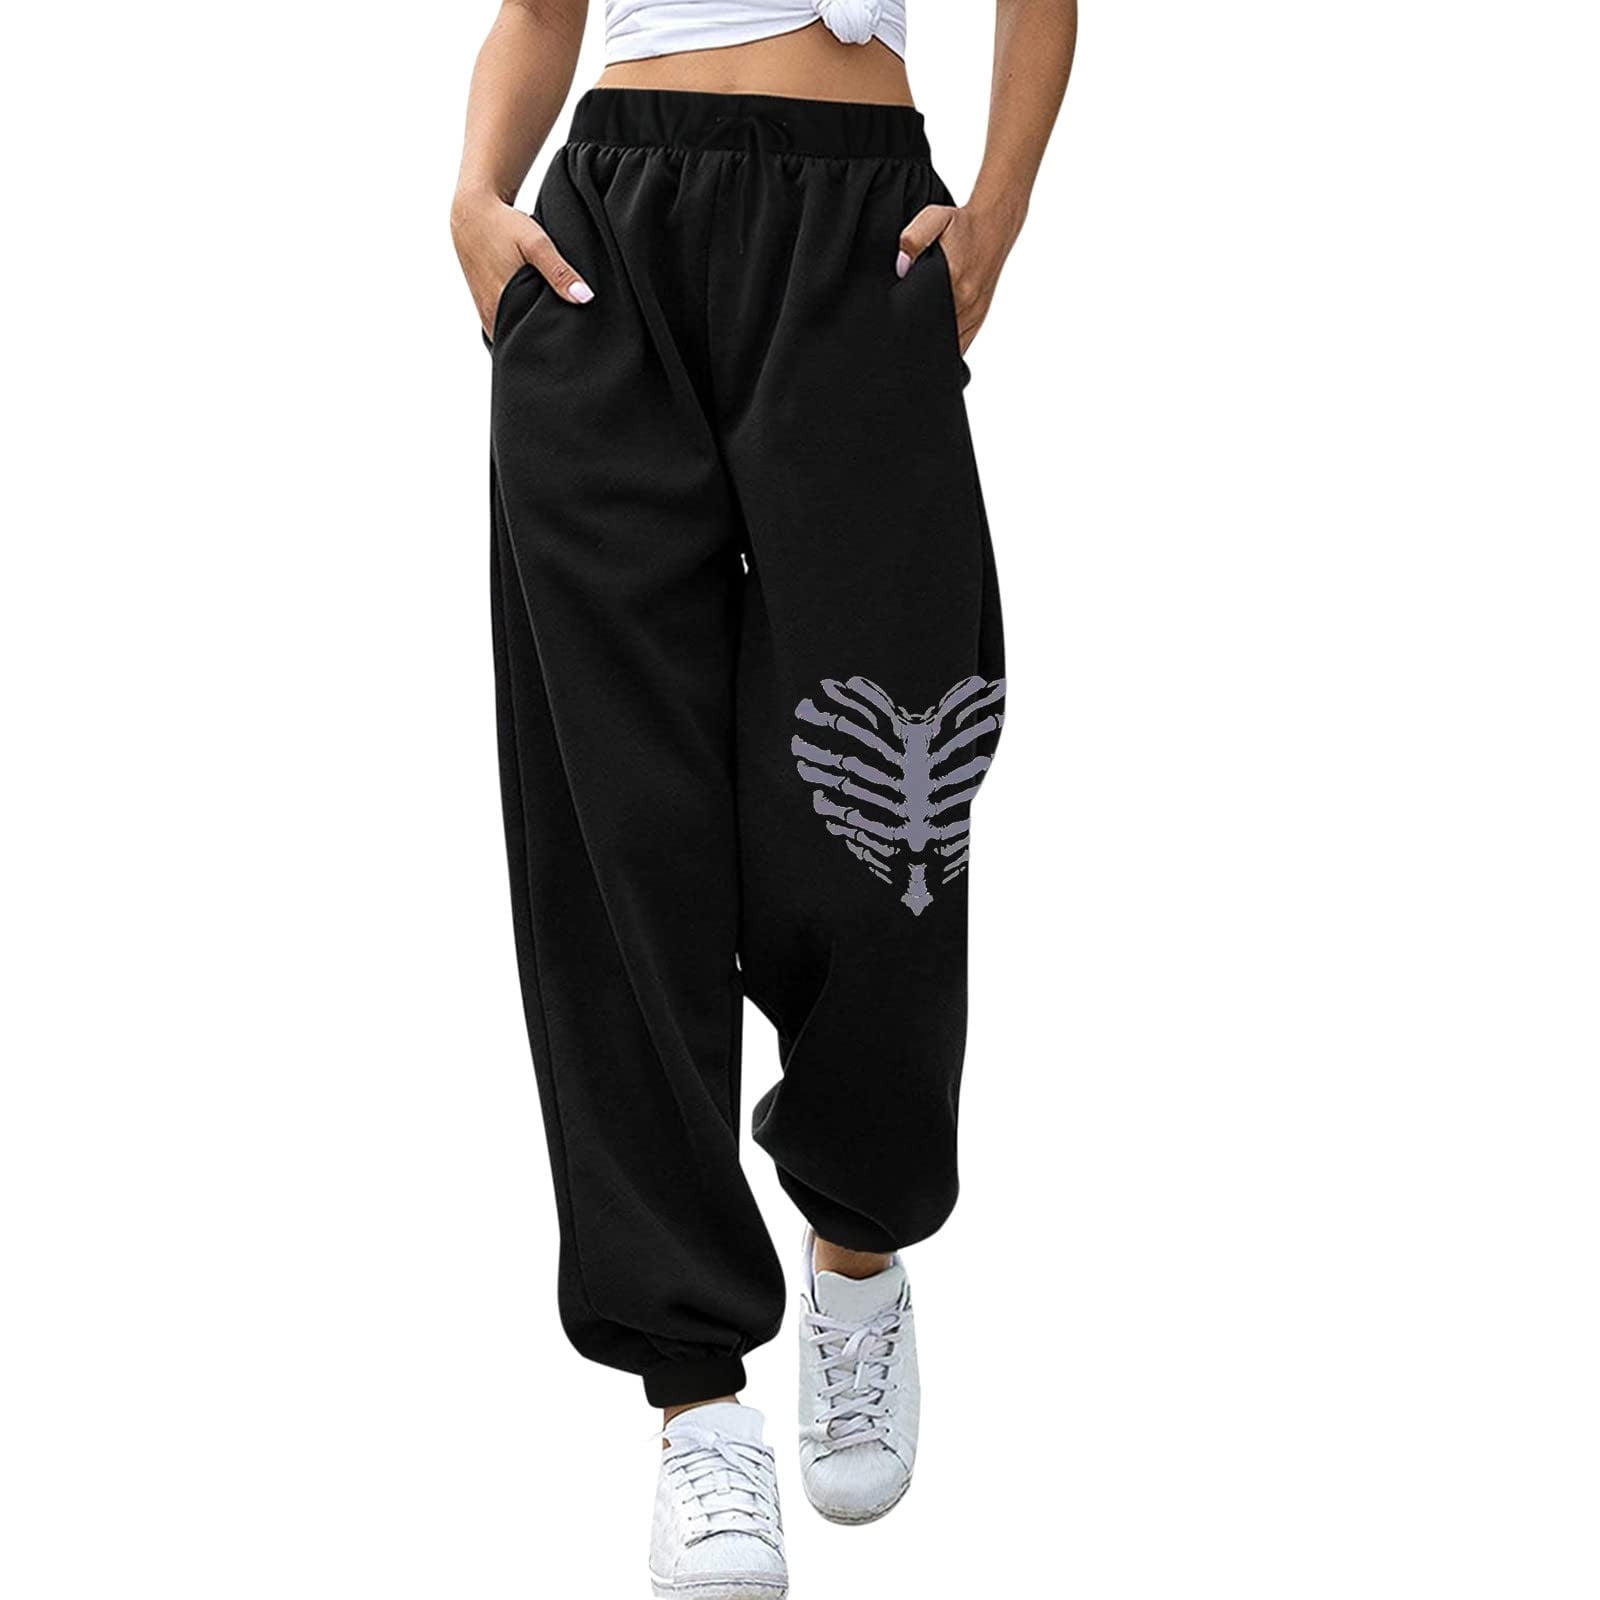 Reduced RQYYD Women's Sweatpants with Pocket, Women Active Baggy Sweatpants  Workout Loose Fit Joggers Dragon Skeleton Elk Print Comfy Running Pants  (Black,3XL) 